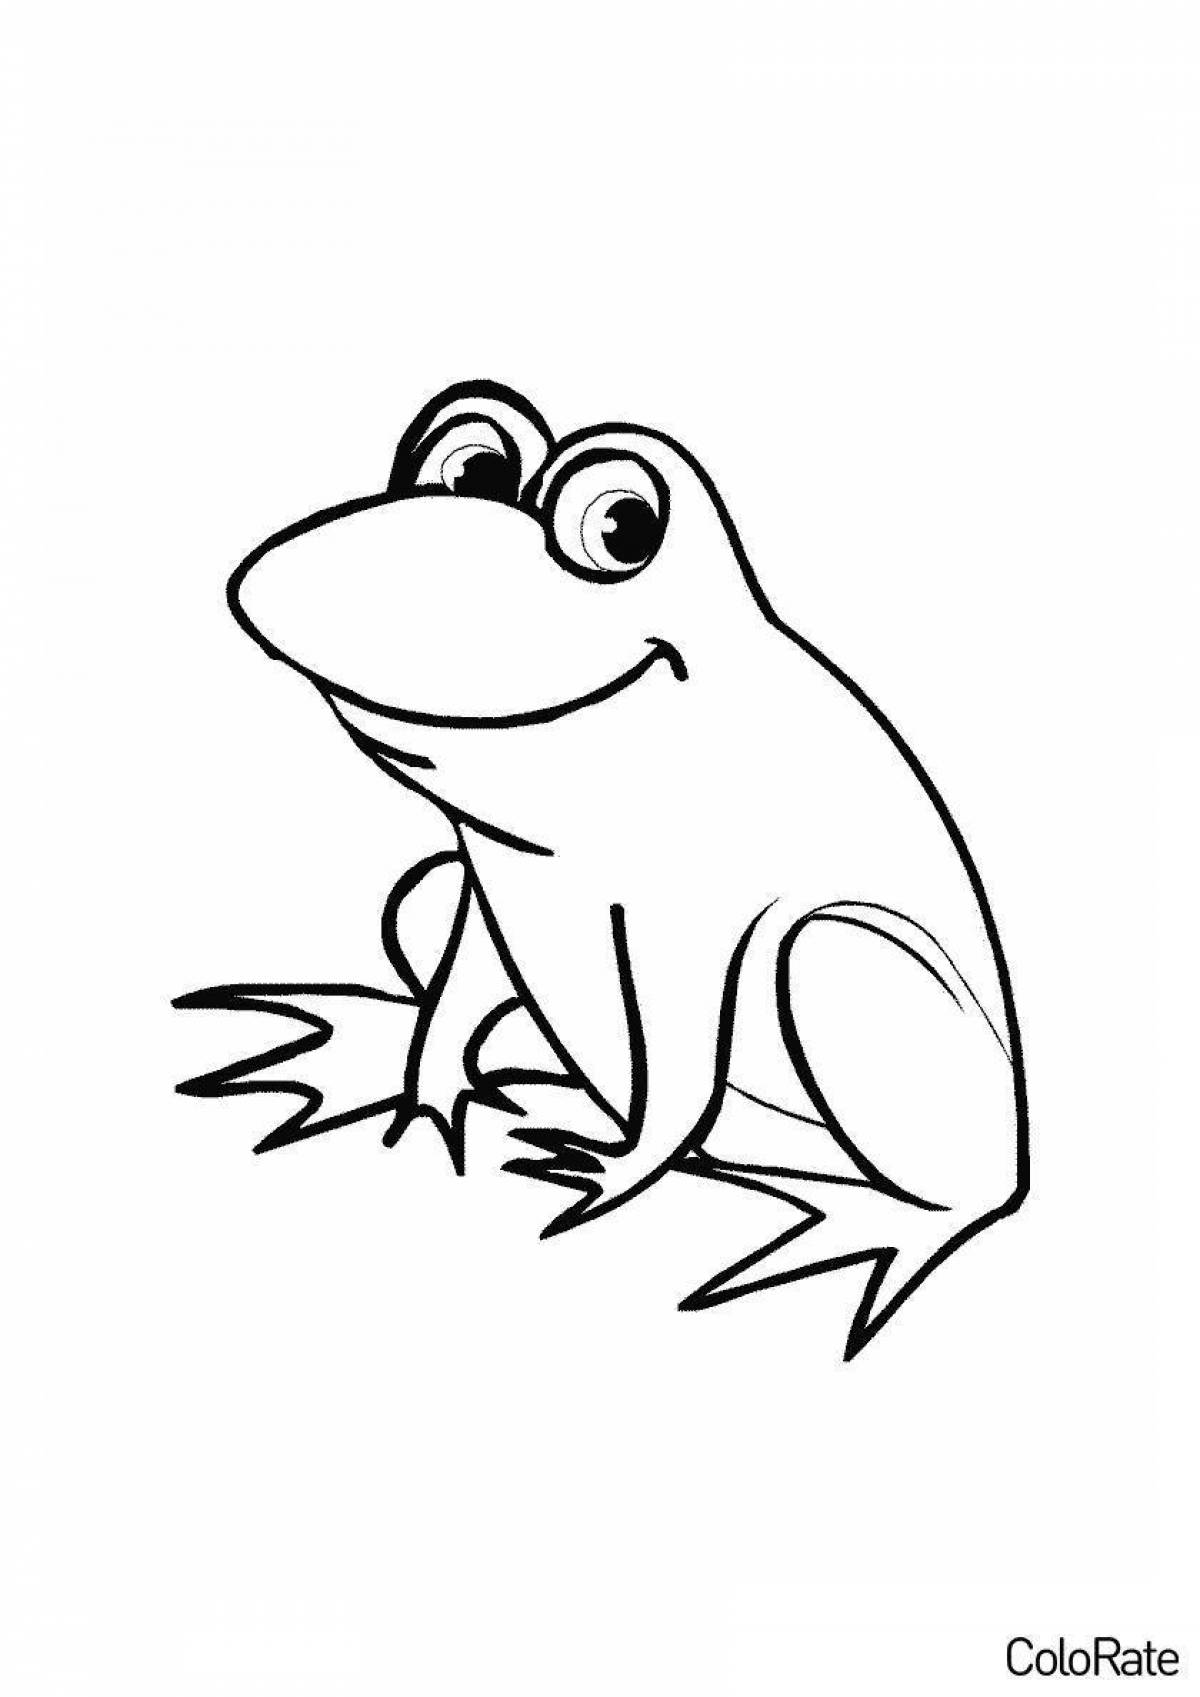 Cute toad coloring book for kids